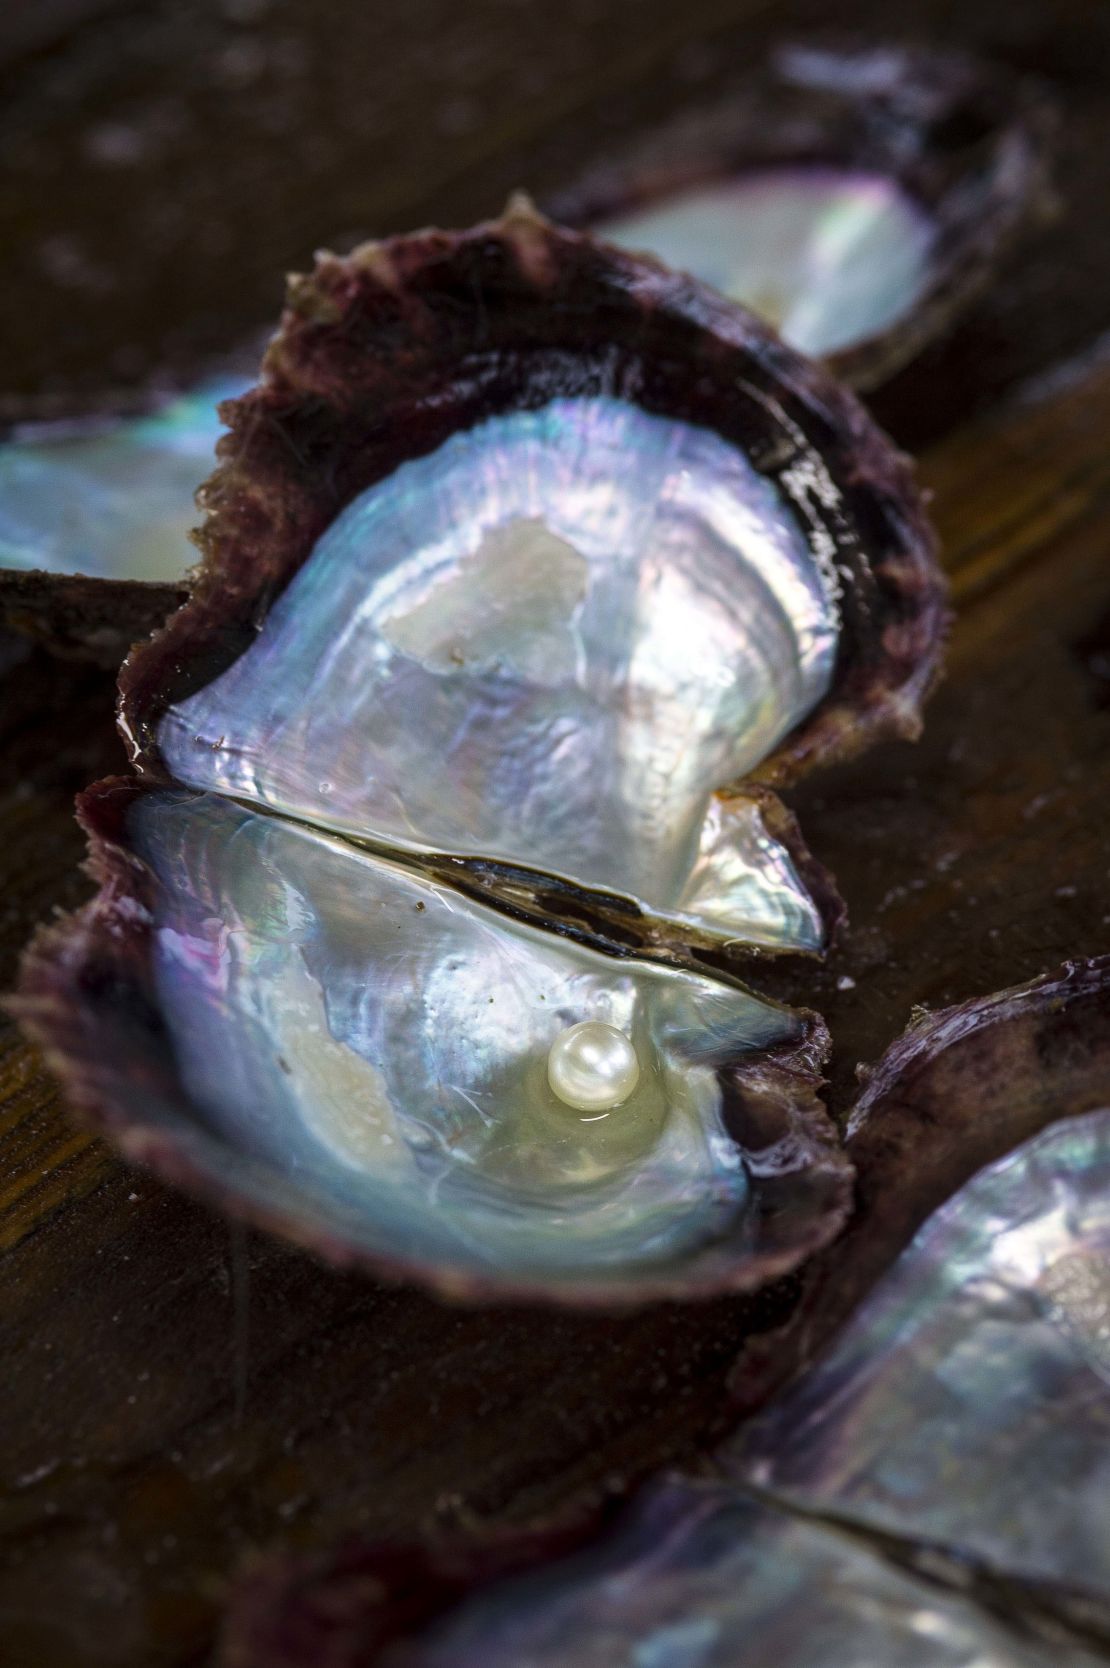 Oysters thrive in temperatures between 10 and 30 degrees Celsius (50 to 86 degrees Fahrenheit), and keeping the mollusks clean is crucial.